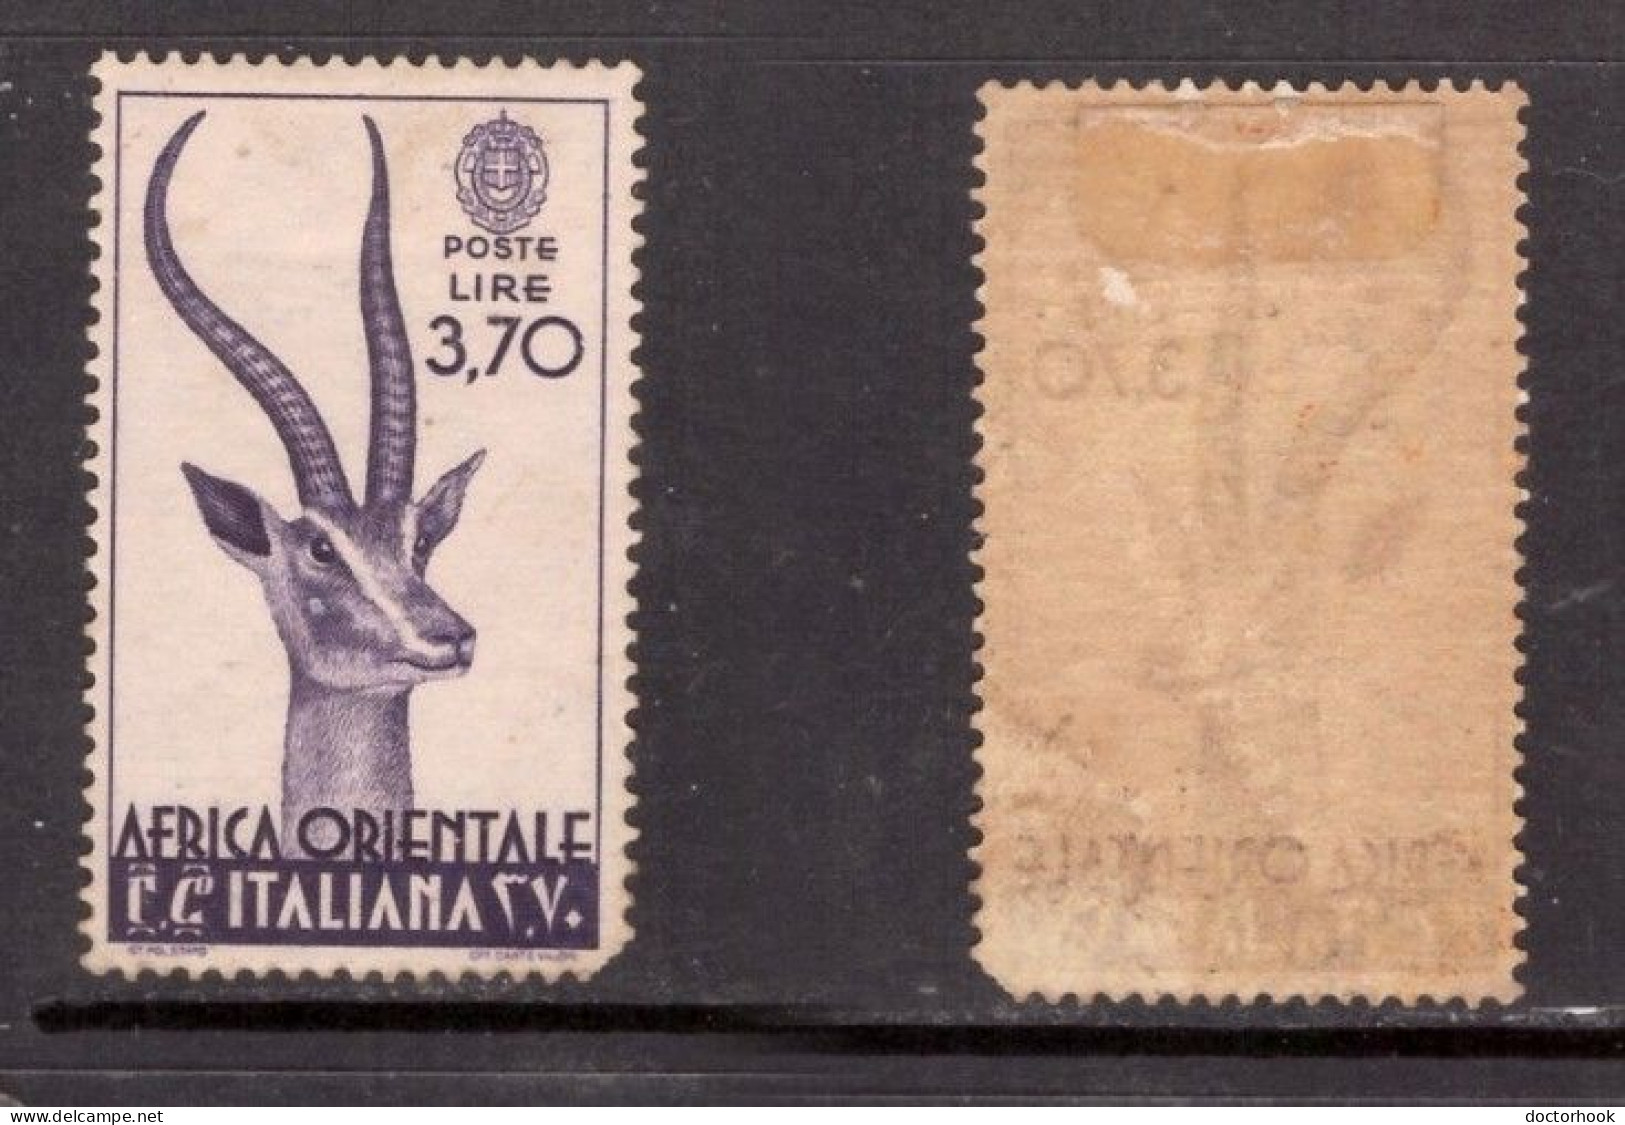 ITALIAN EAST AFRICA   Scott # 17* MINT HINGED (CONDITION AS PER SCAN) (Stamp Scan # 957-1) - Afrique Orientale